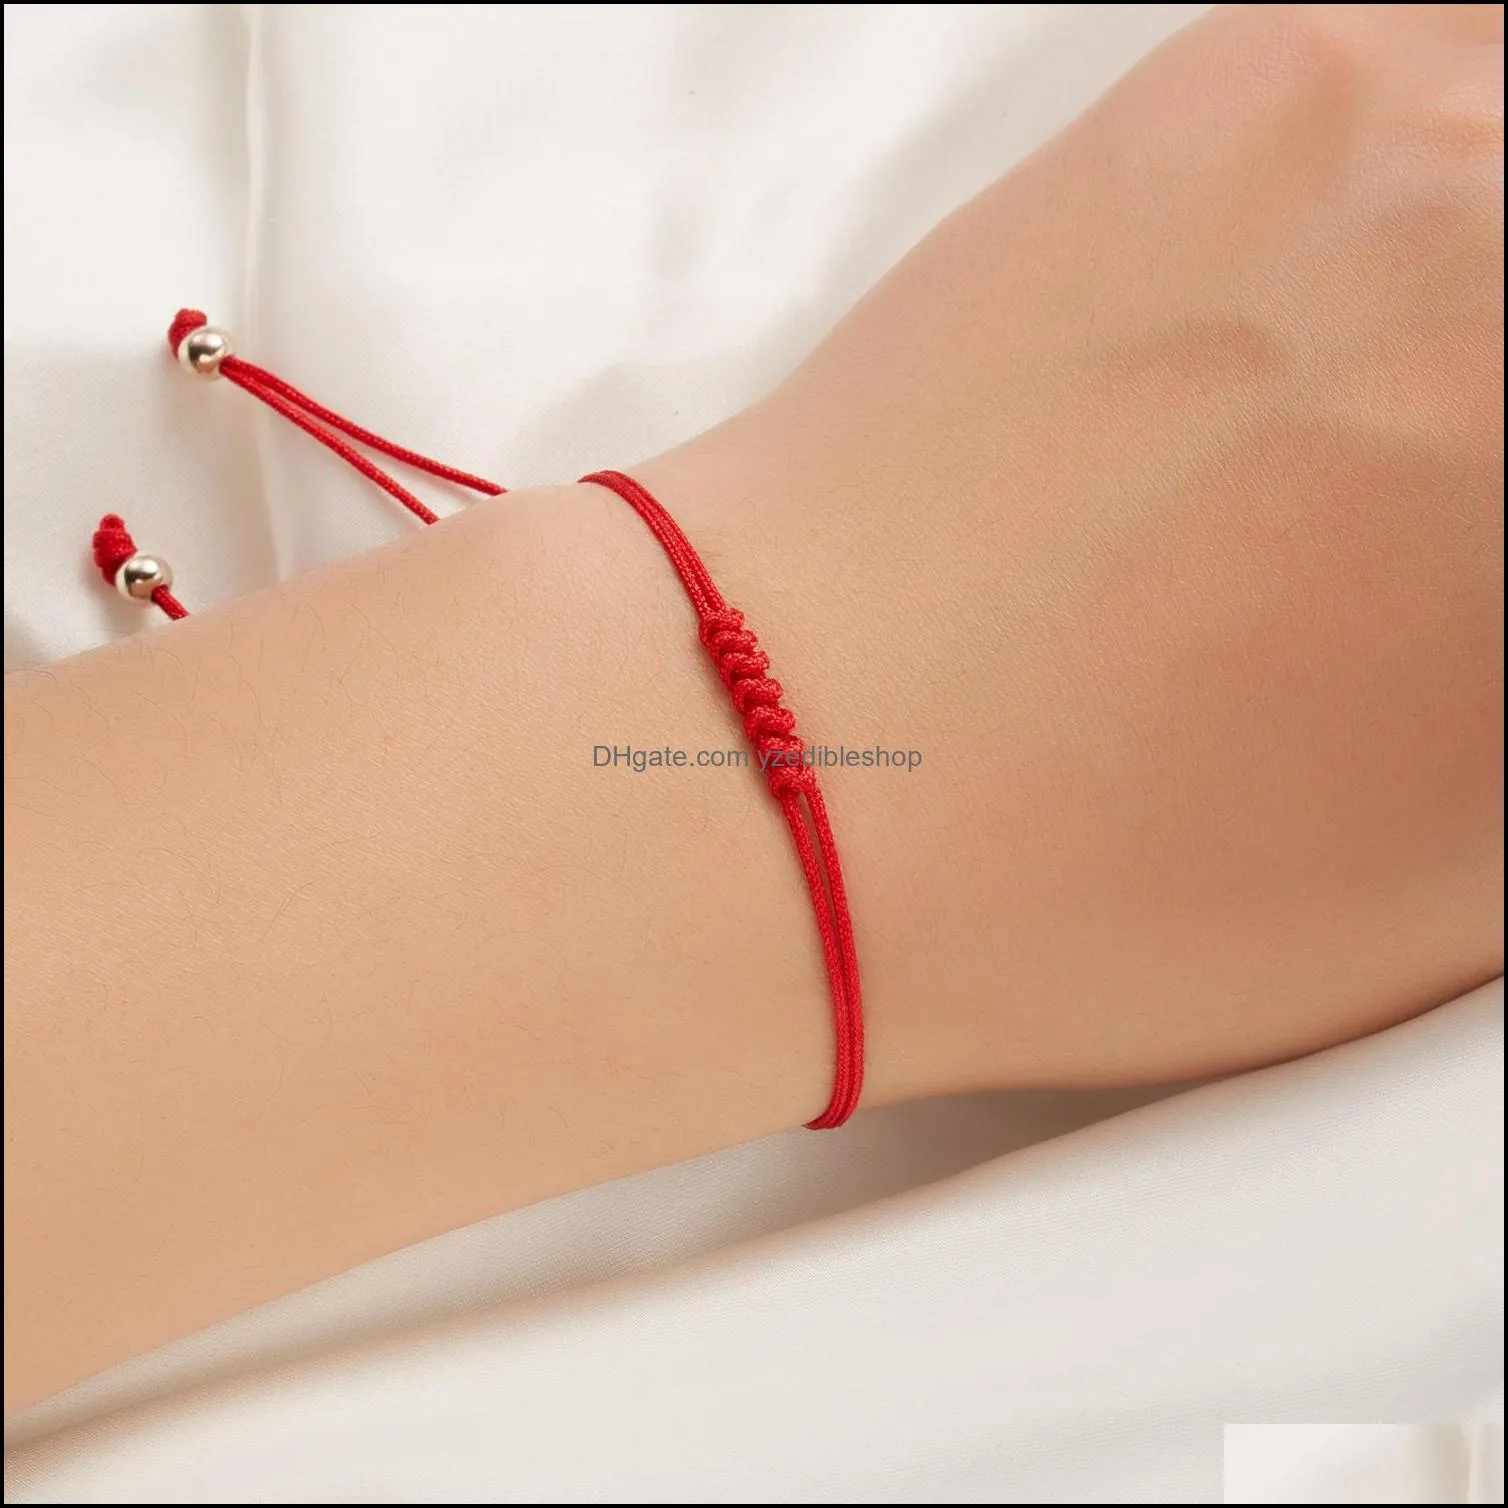 7 knots red string bracelet protection good luck amulet for success prosperity handmade rope bracelets lucky charm bangles